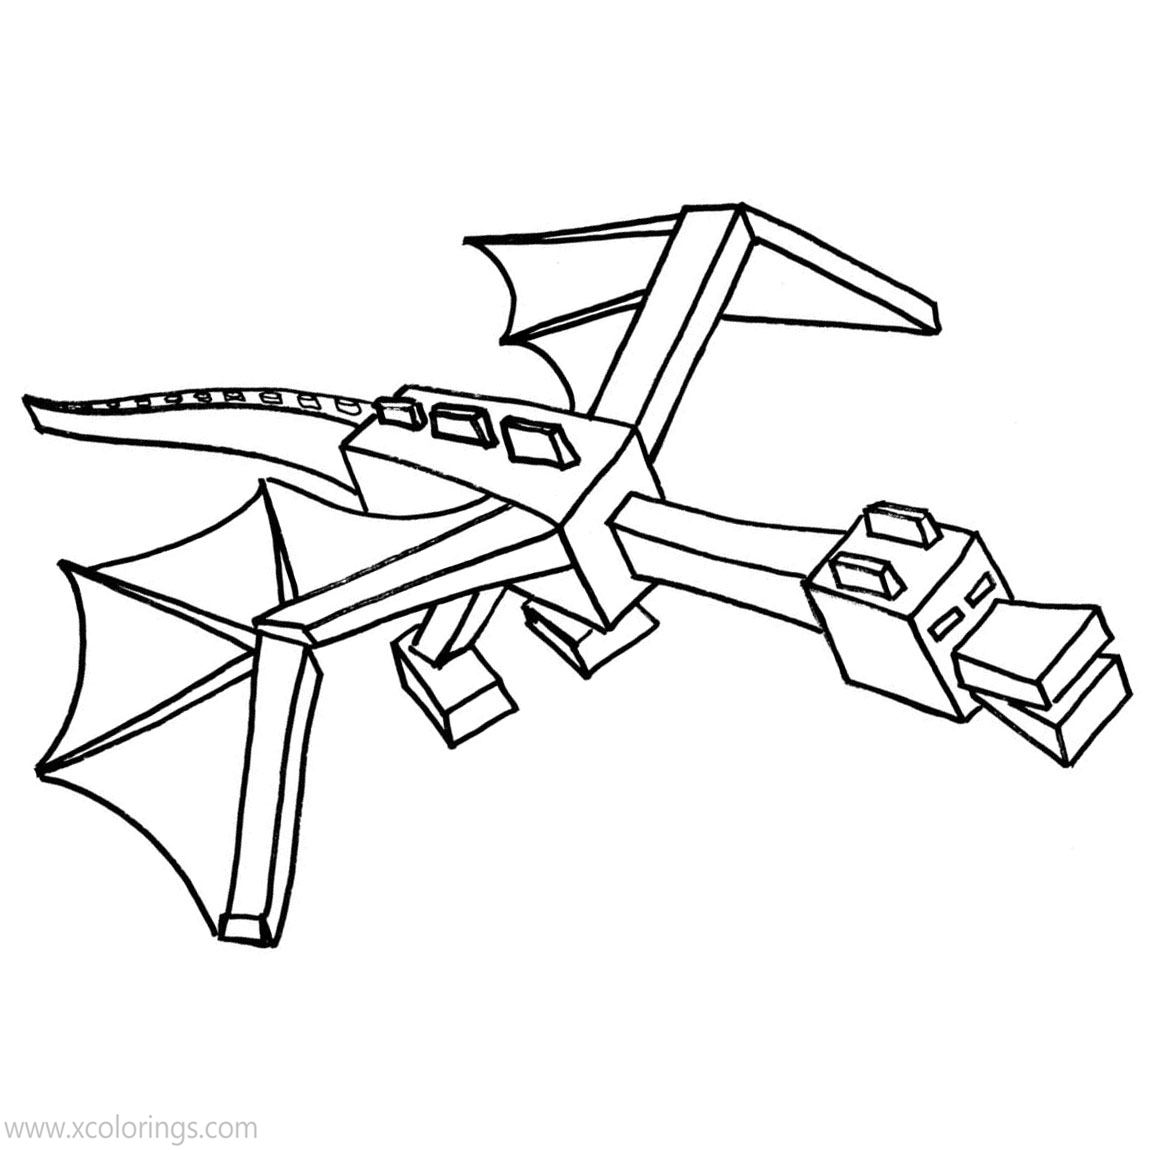 Minecraft Pictures To Colour Ender Dragon : Ender Dragon Coloring Pages  Google Search Dragon Coloring Page Minecraft Coloring Pages Unicorn Coloring  Pages